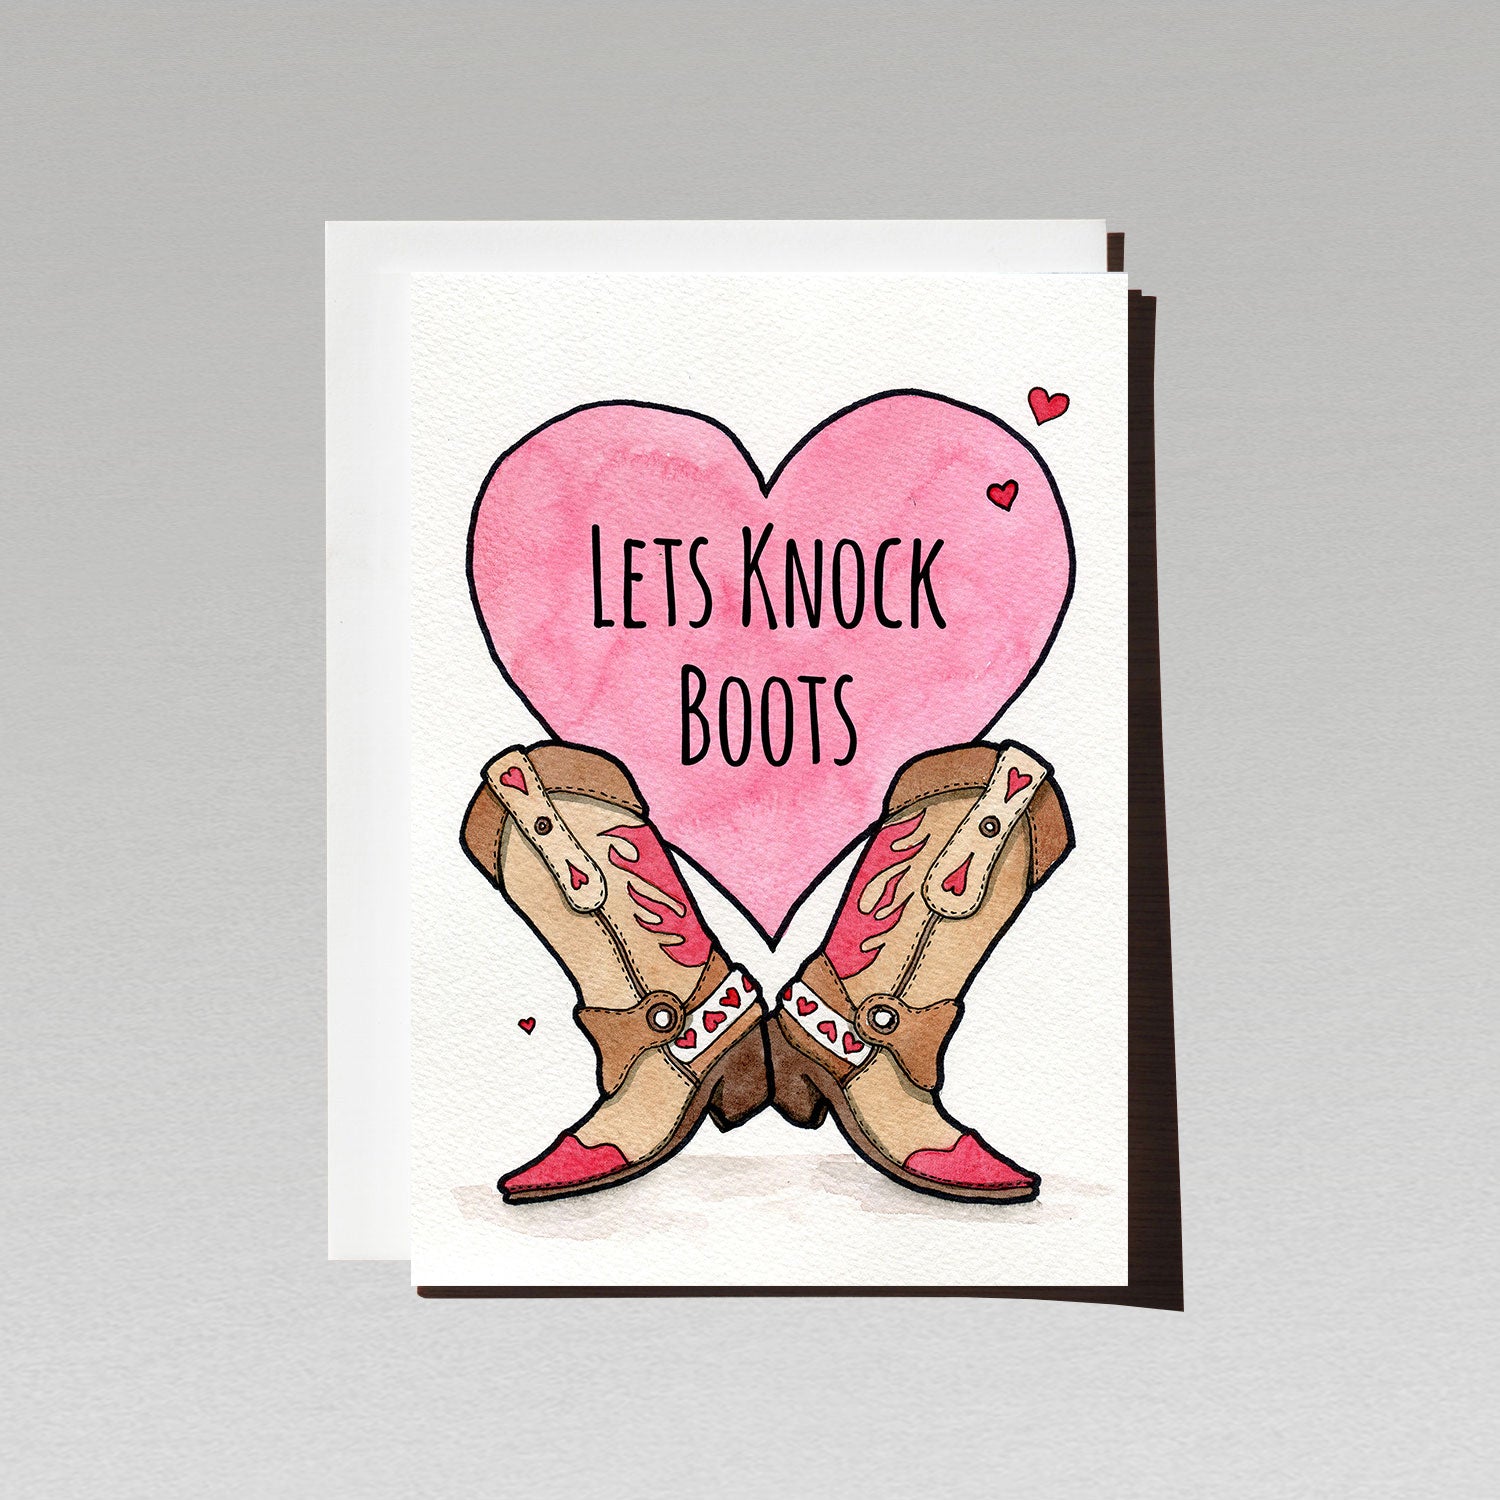 Pair of cowboy boots on a giant pink loveheart on white background with text Lets Knock Boots